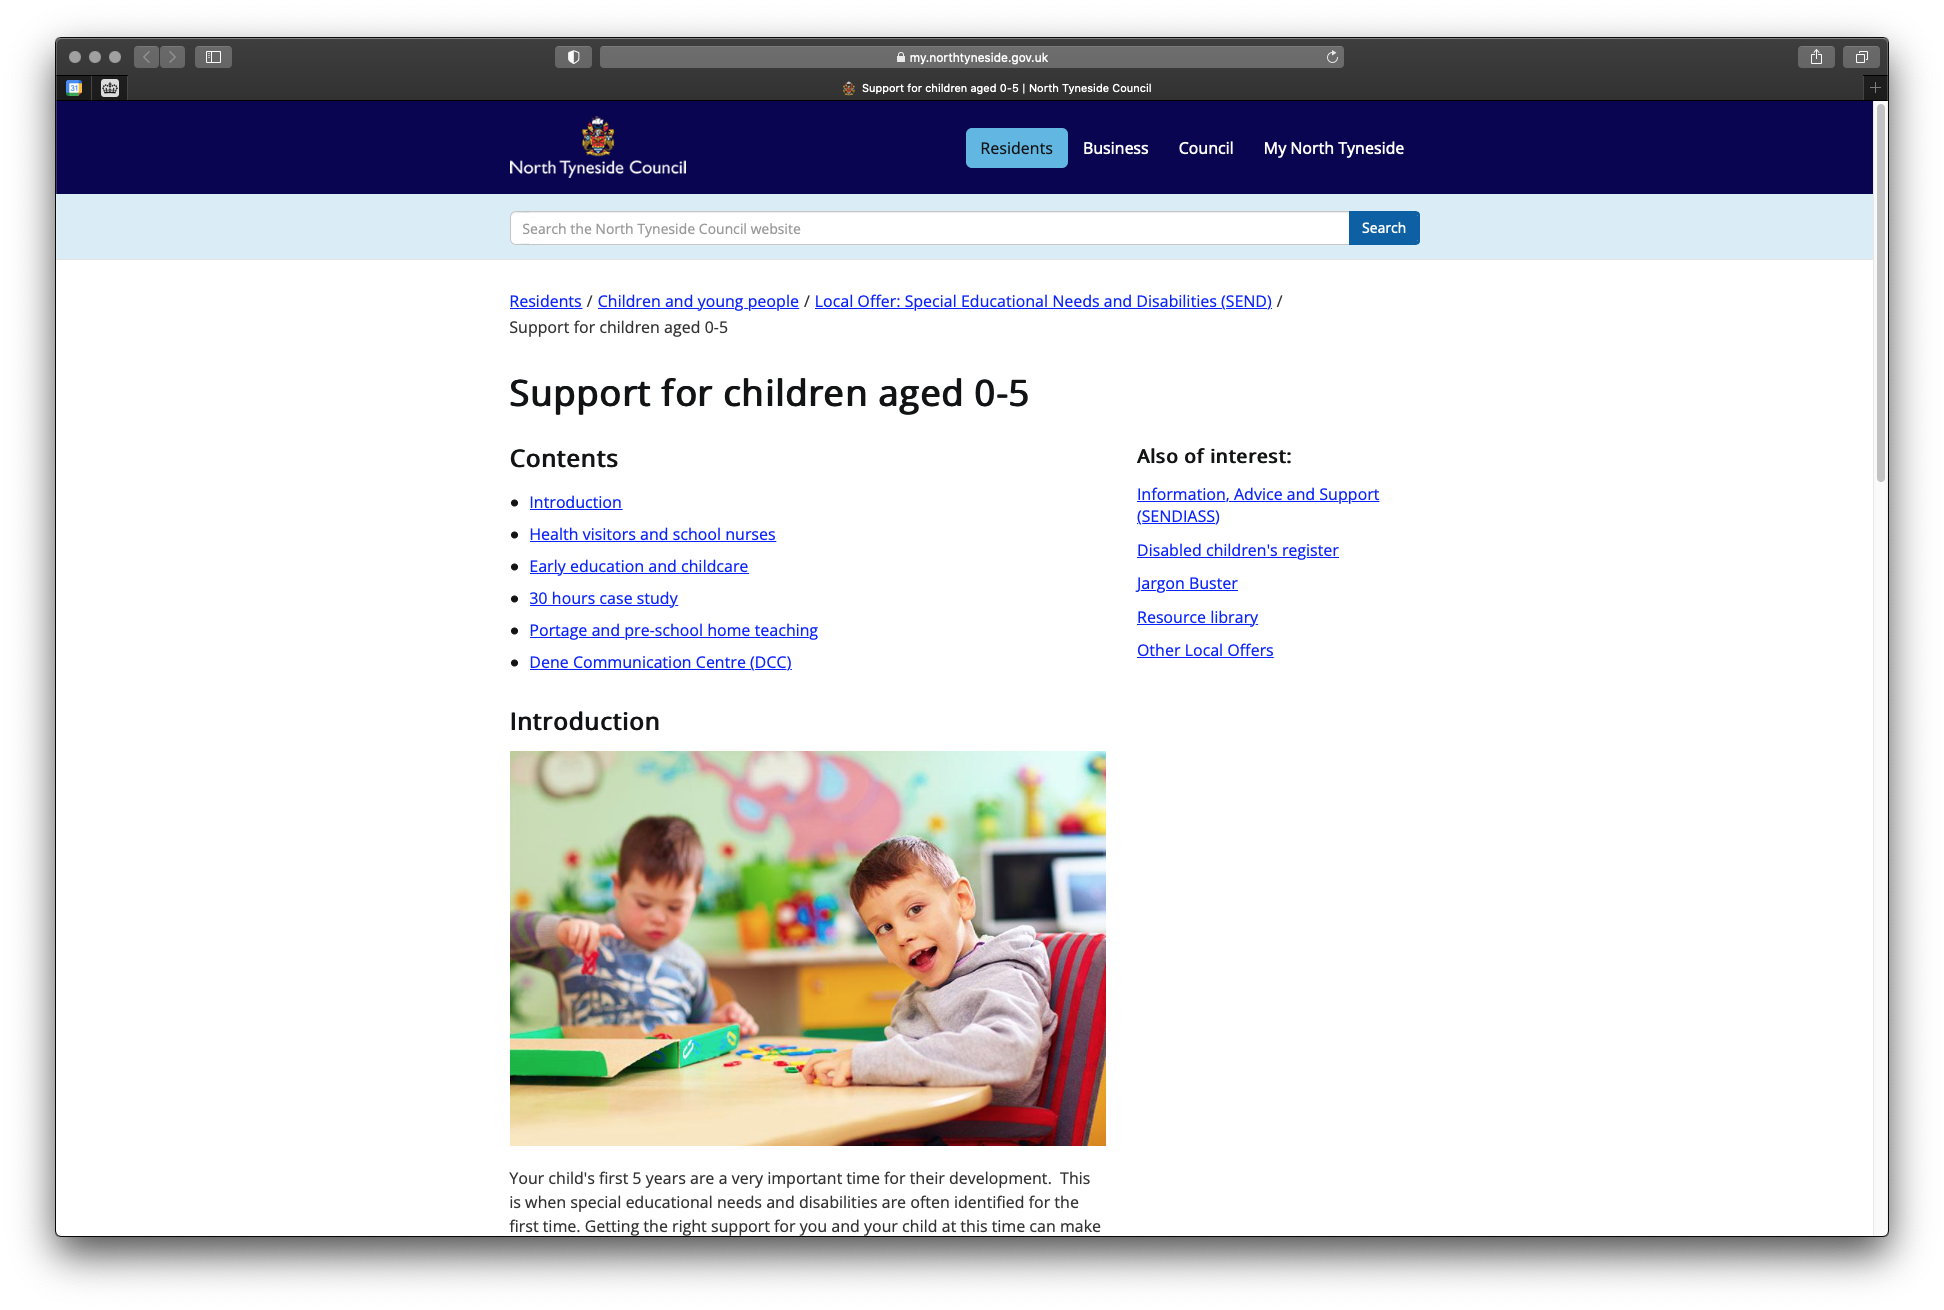 Support for children aged 0-5